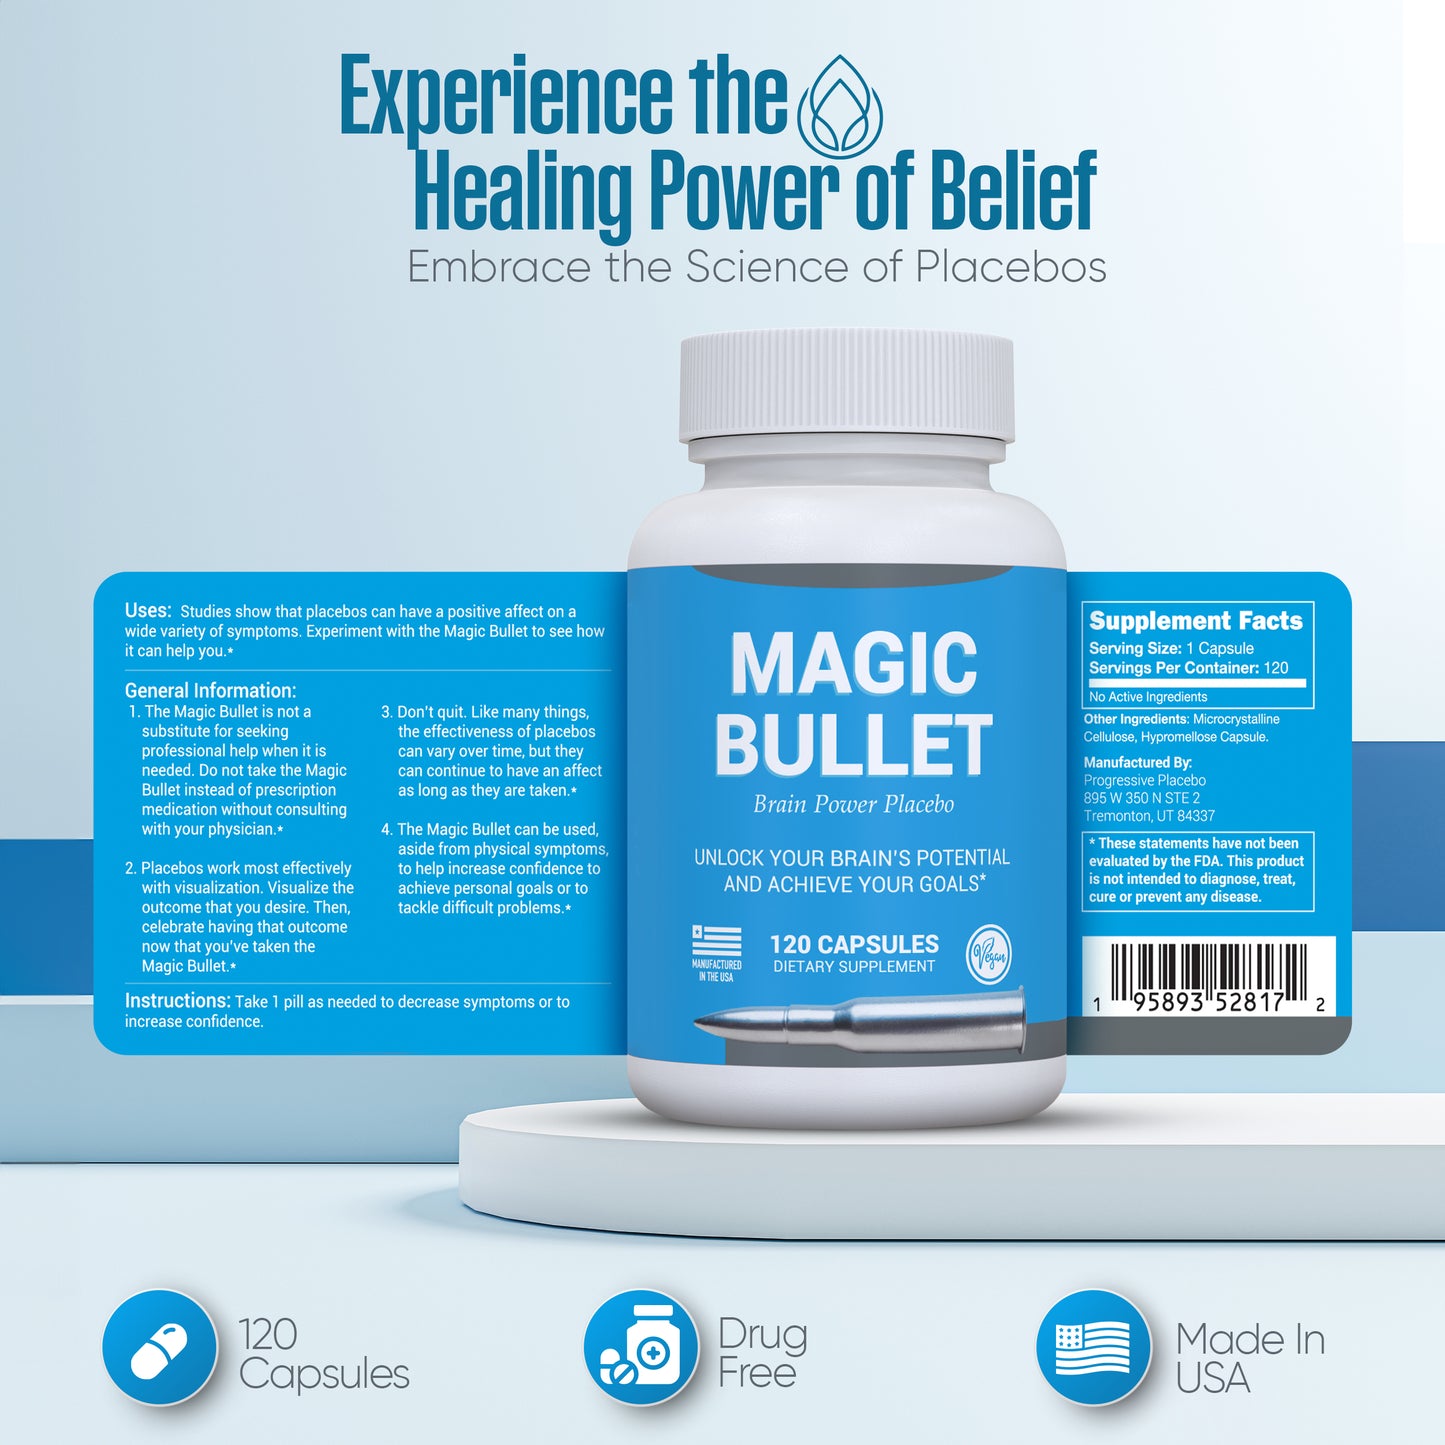 Progressive Placebo Family Bundle - 2 Items - Magic Bullet Capsules and Magic Bullet JR. Tablets - Start Your Placebo Journey with The Whole Family - Parents and Children Together.